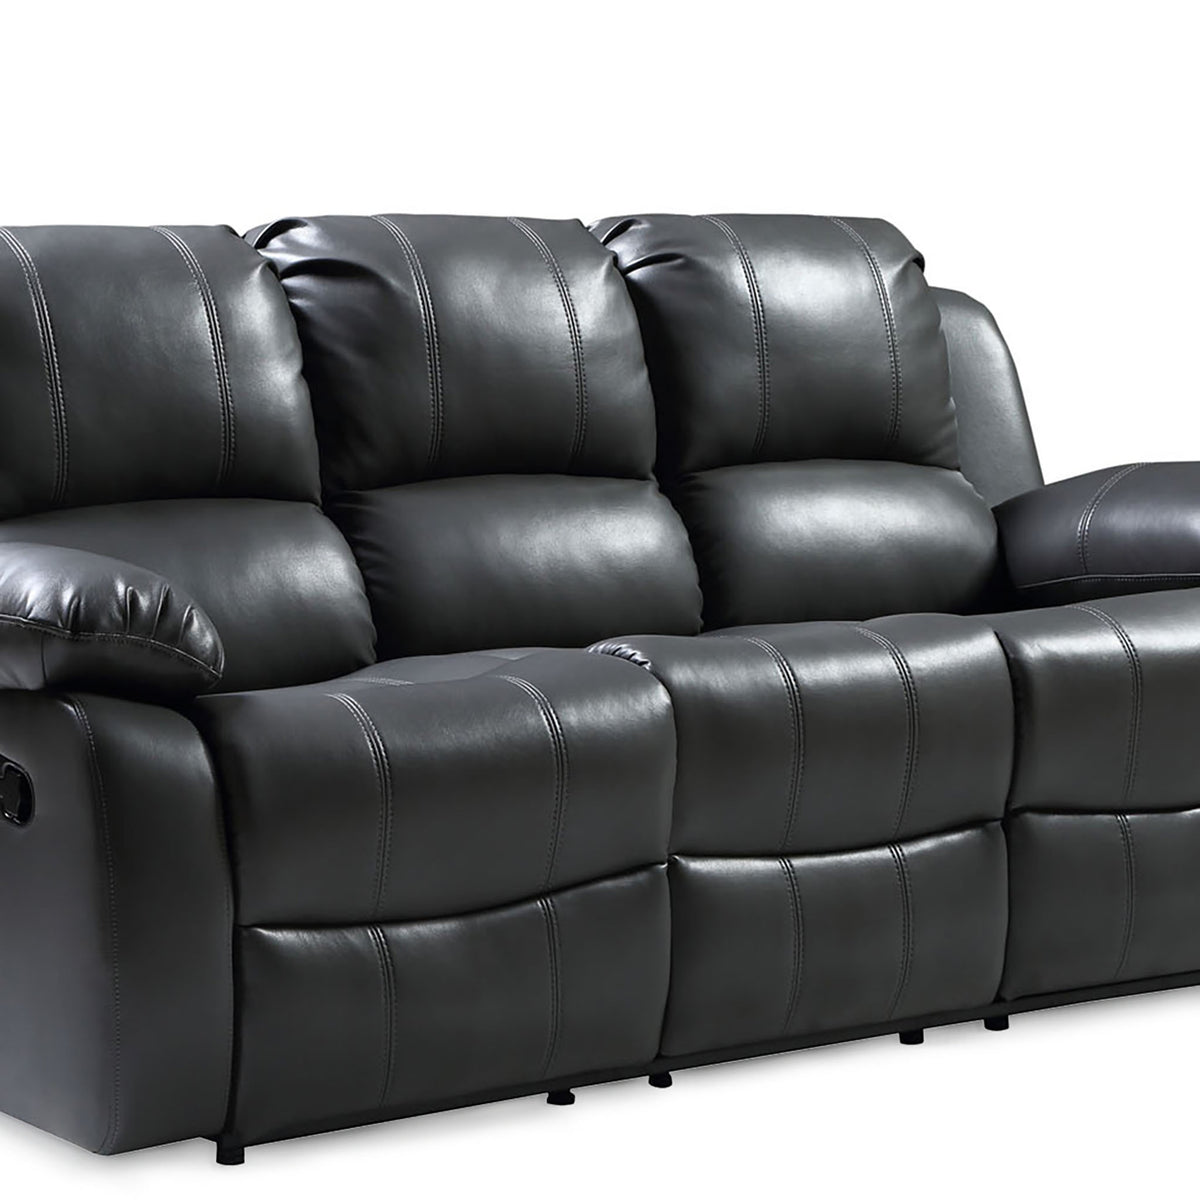 Valencia Grey 3 Seater Reclining Air Leather Sofa - Close up of seating